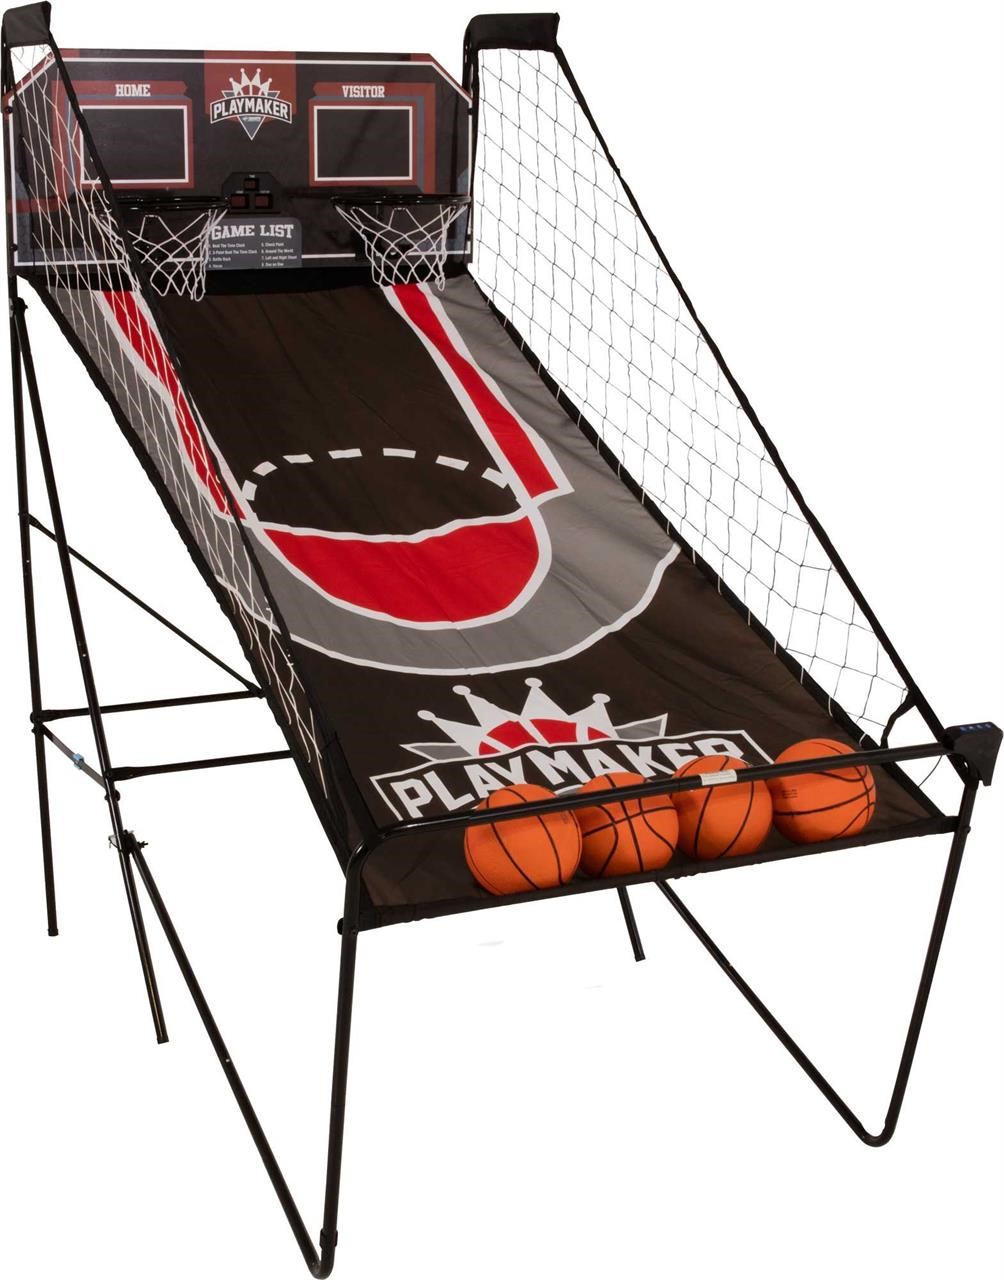 $100  Triumph Play Maker Double Basketball Game